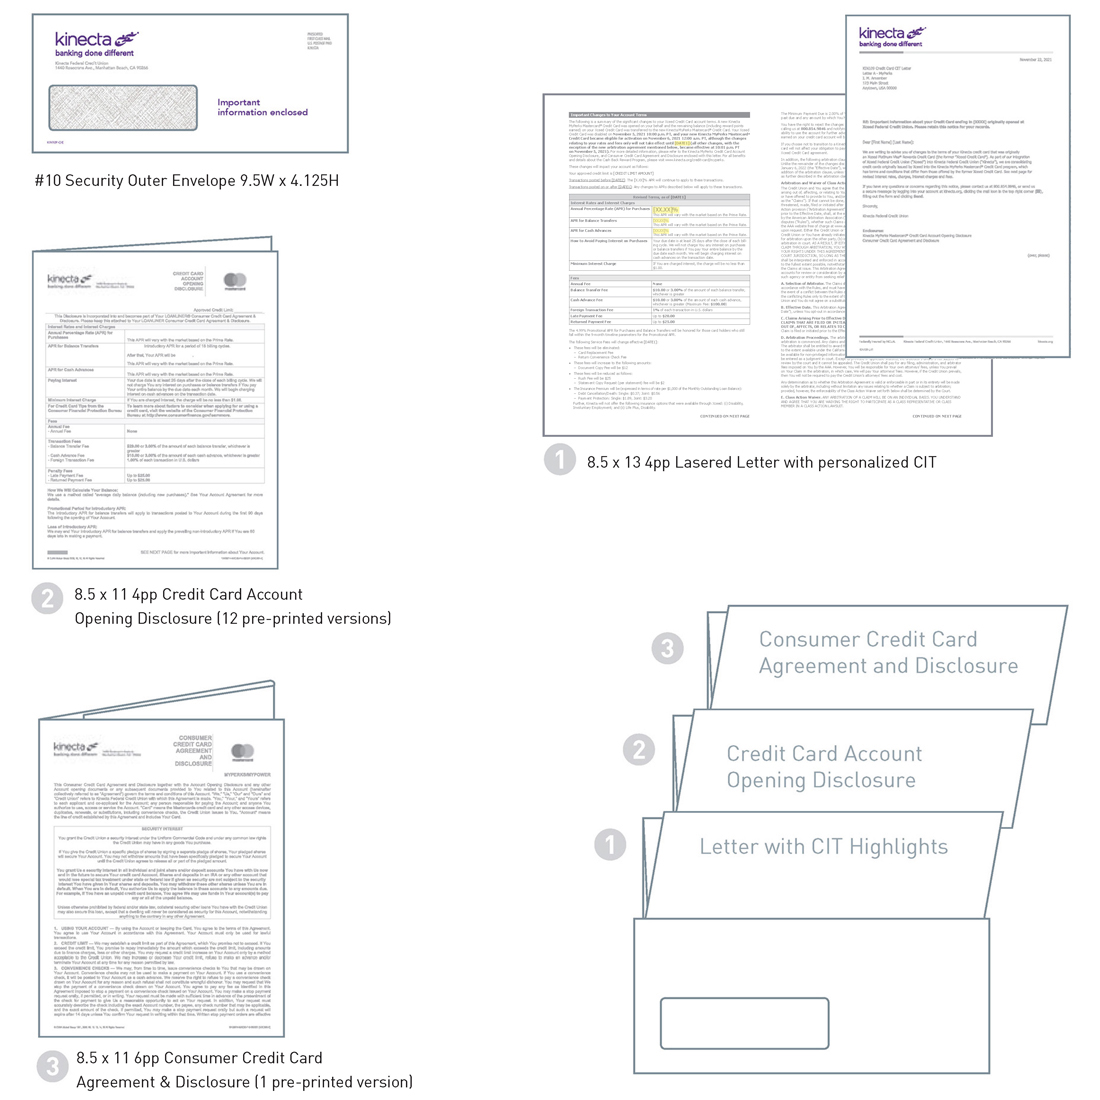 Images of security outer envelope, letter with personalized change in terms, credit card account opening disclosure and consumer credit card agreement and disclosure